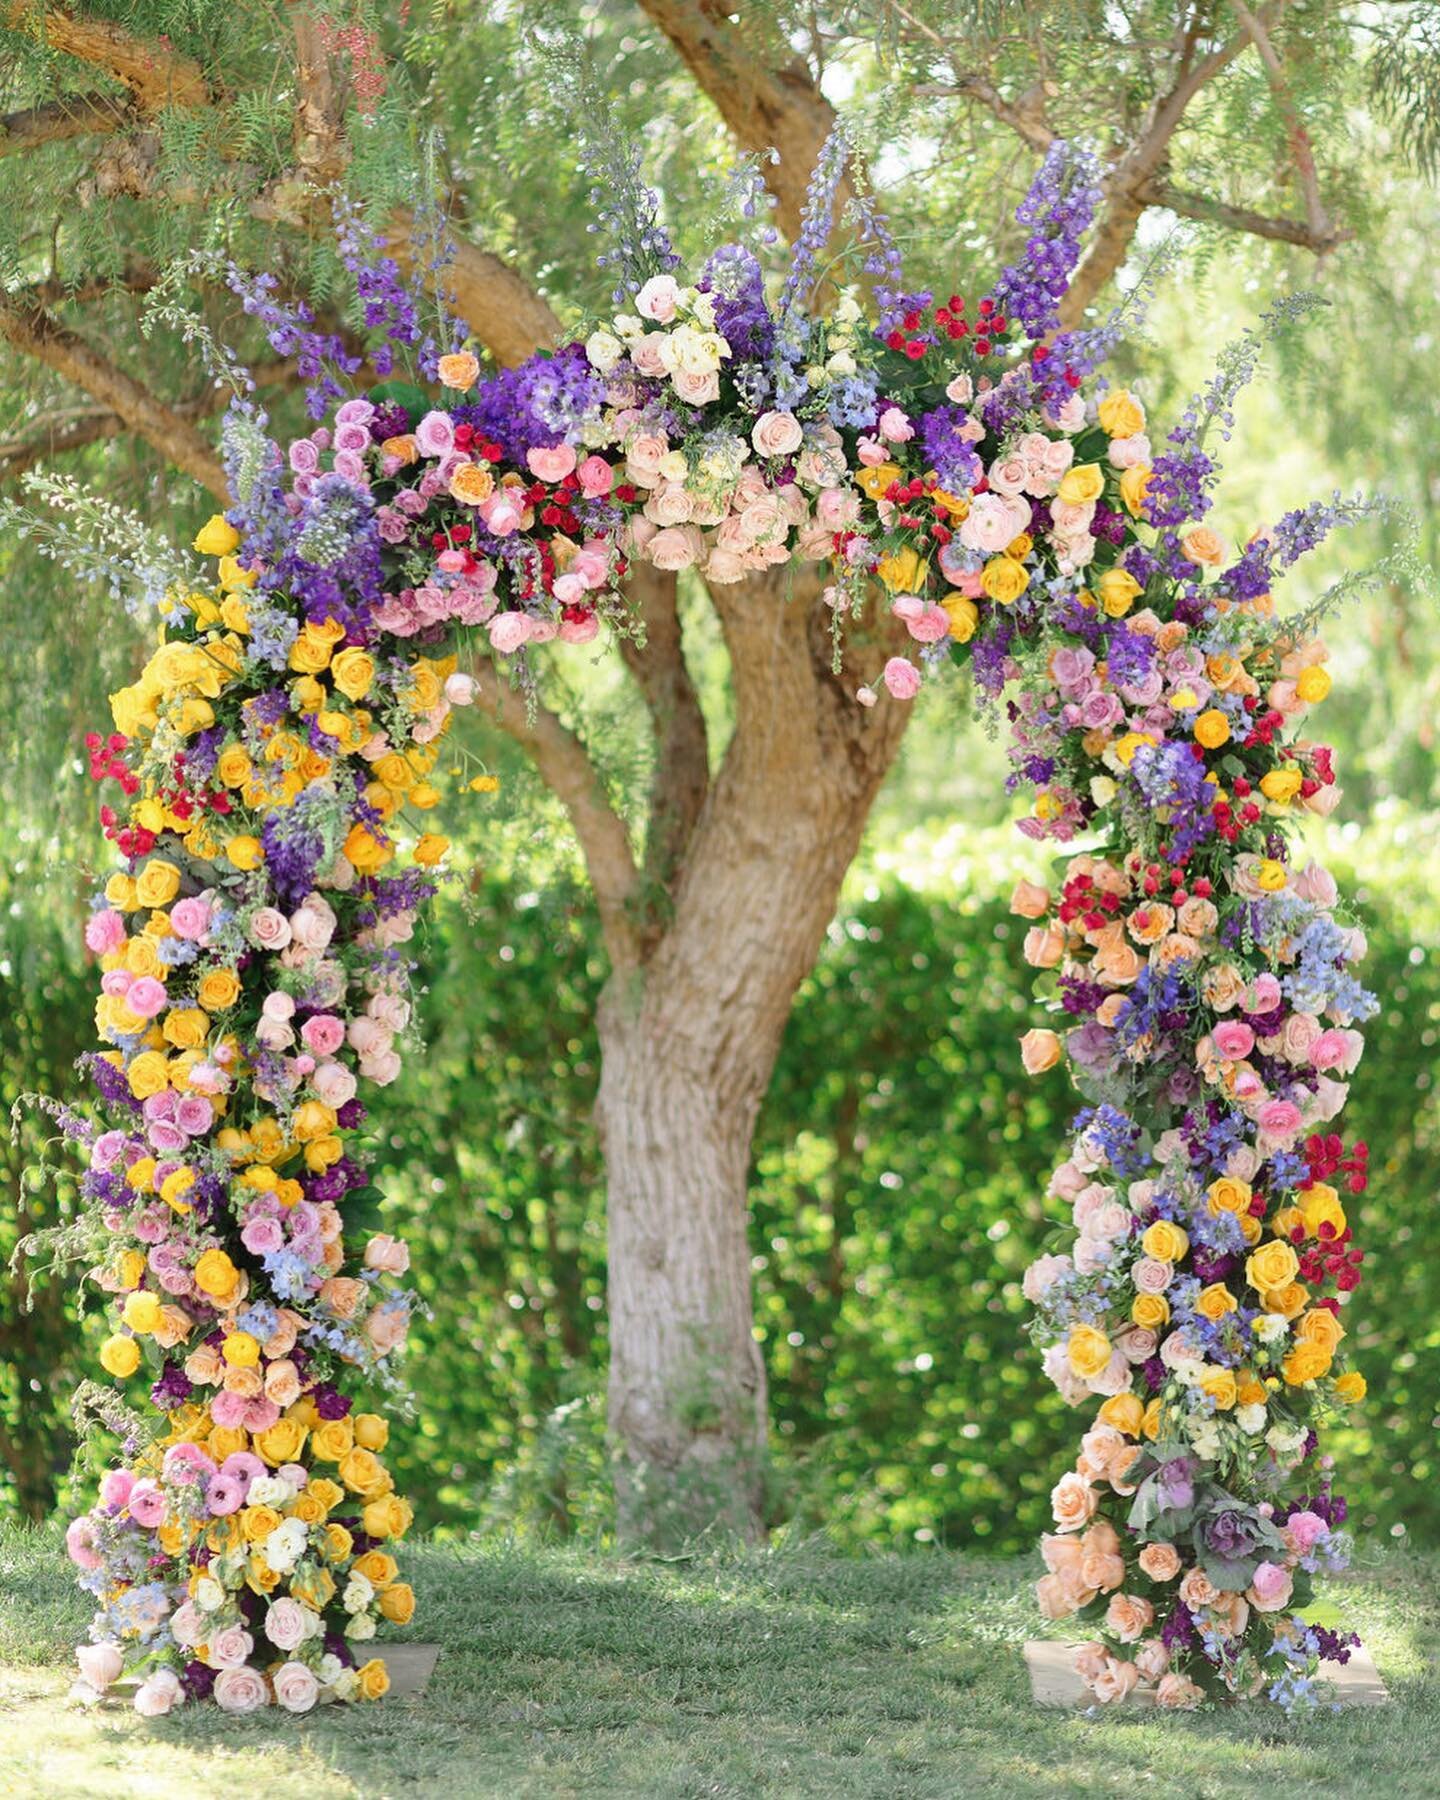 This weekend&rsquo;s arch was even more gorgeous in person! So grand, lush, and full of the best and brightest Spring floral 🌸 💜🌼🌷Swipe for the lovely couple 💝💝
Photo @elizabethburgiphotography 
Florals @h.afloraldesign 
#atwinewedding